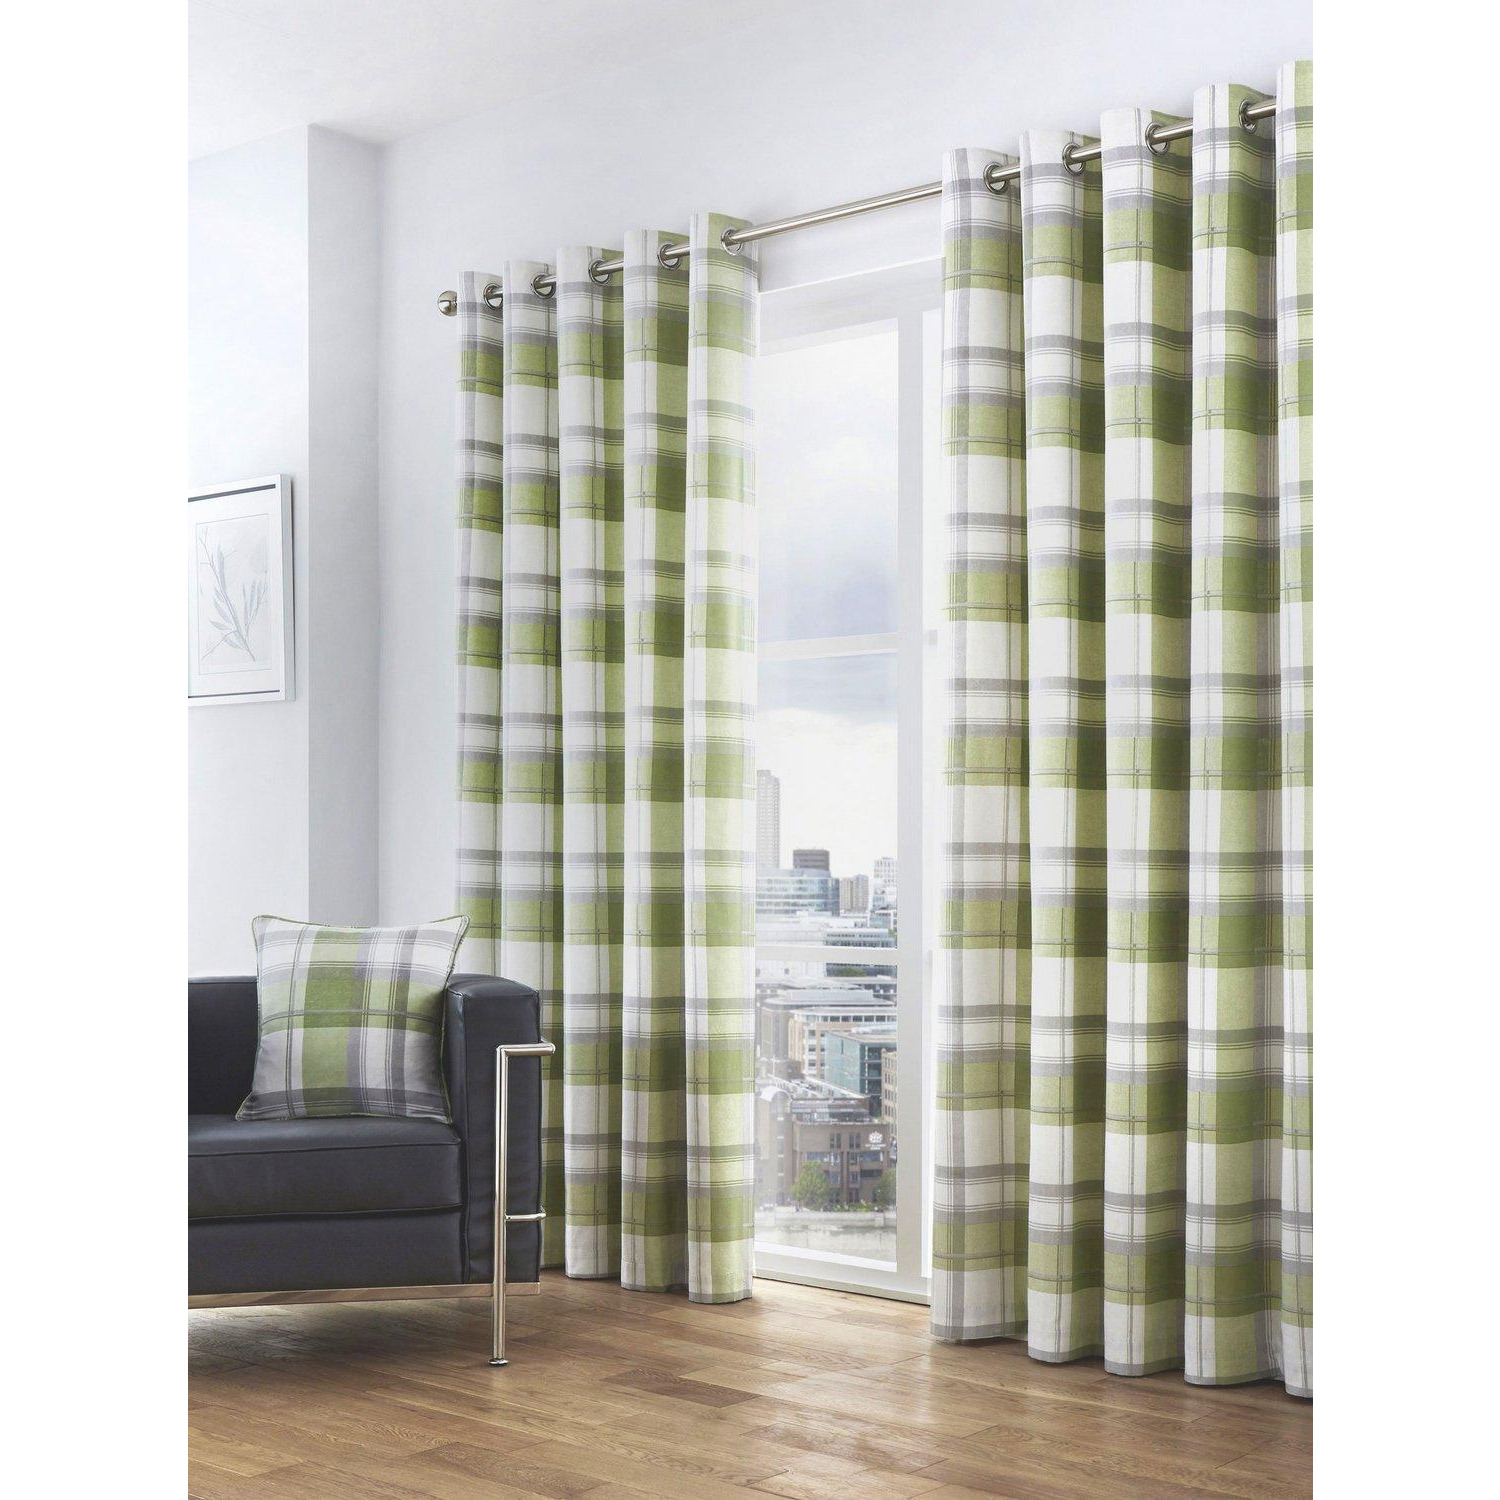 'Balmoral Check' Country Checked Pattern Pair of Eyelet Curtains - image 1